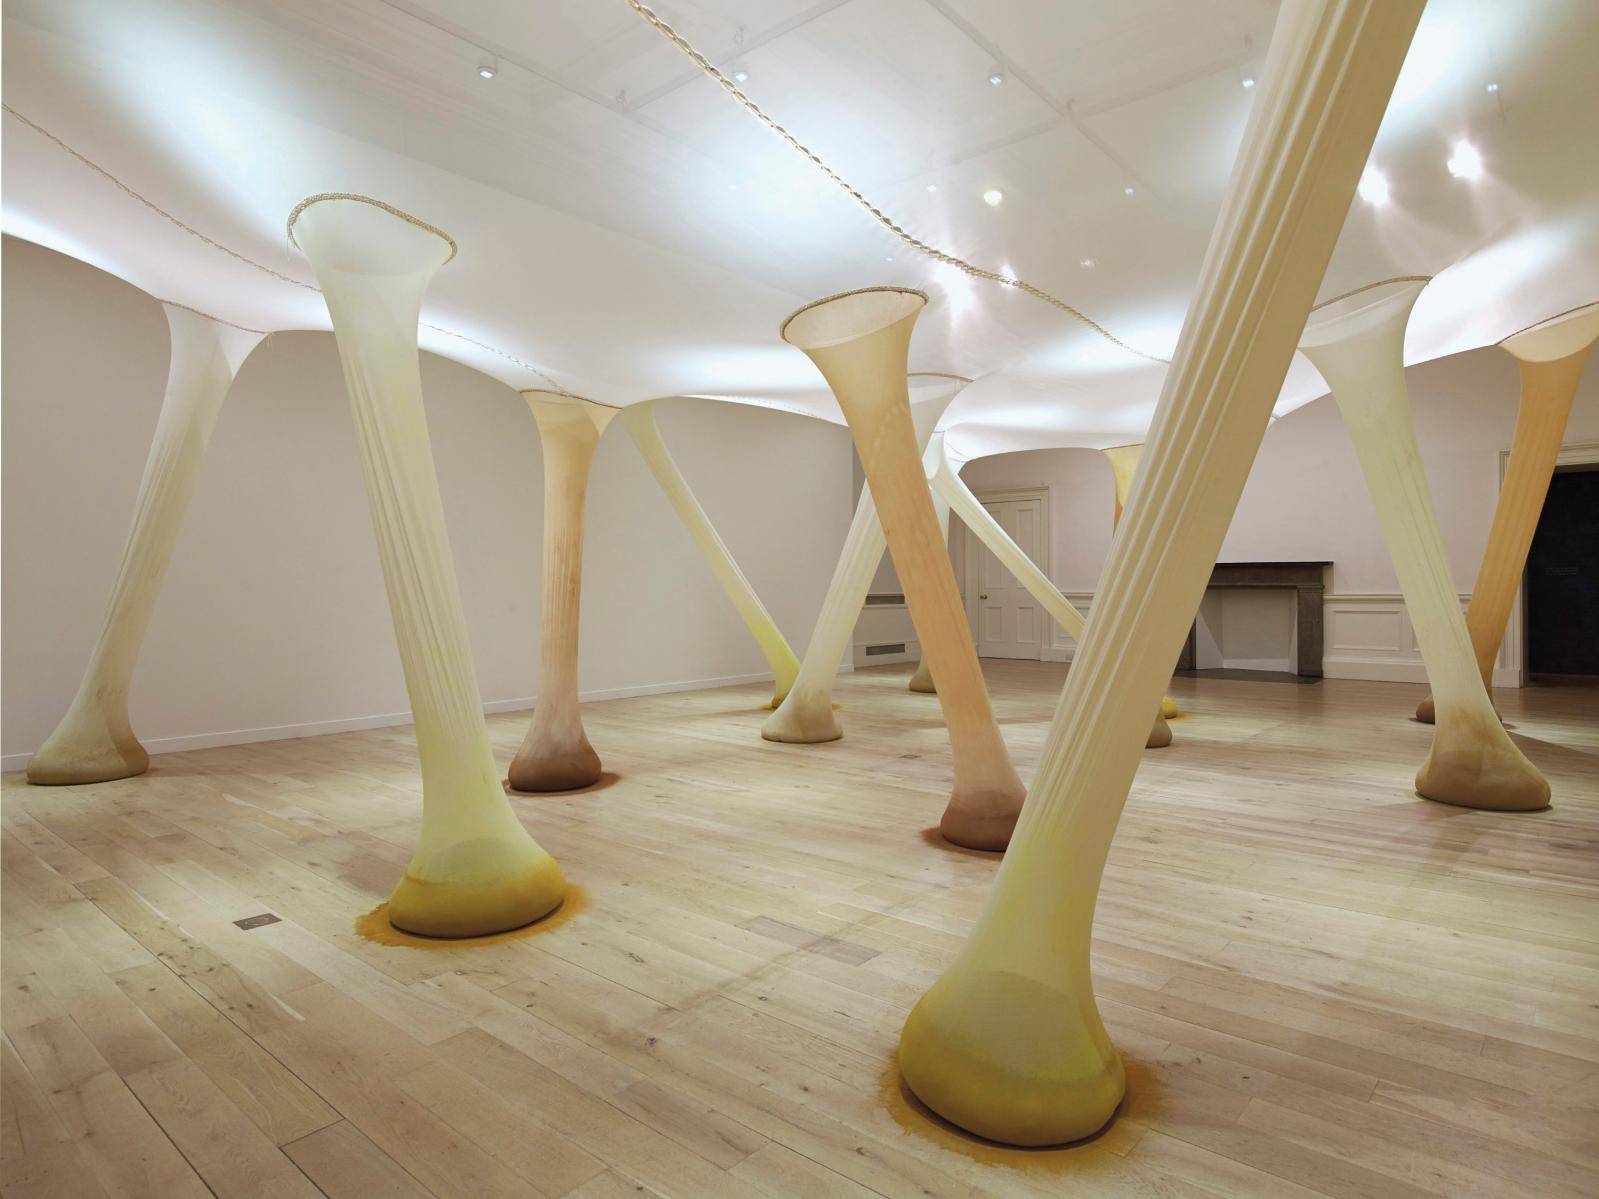 Ernesto Neto (b. 1964), It Happens When The Body Is Anatomy Of Time, 2000, lycra tulle, cloves, cumin and turmeric, variable dimensions.Vi